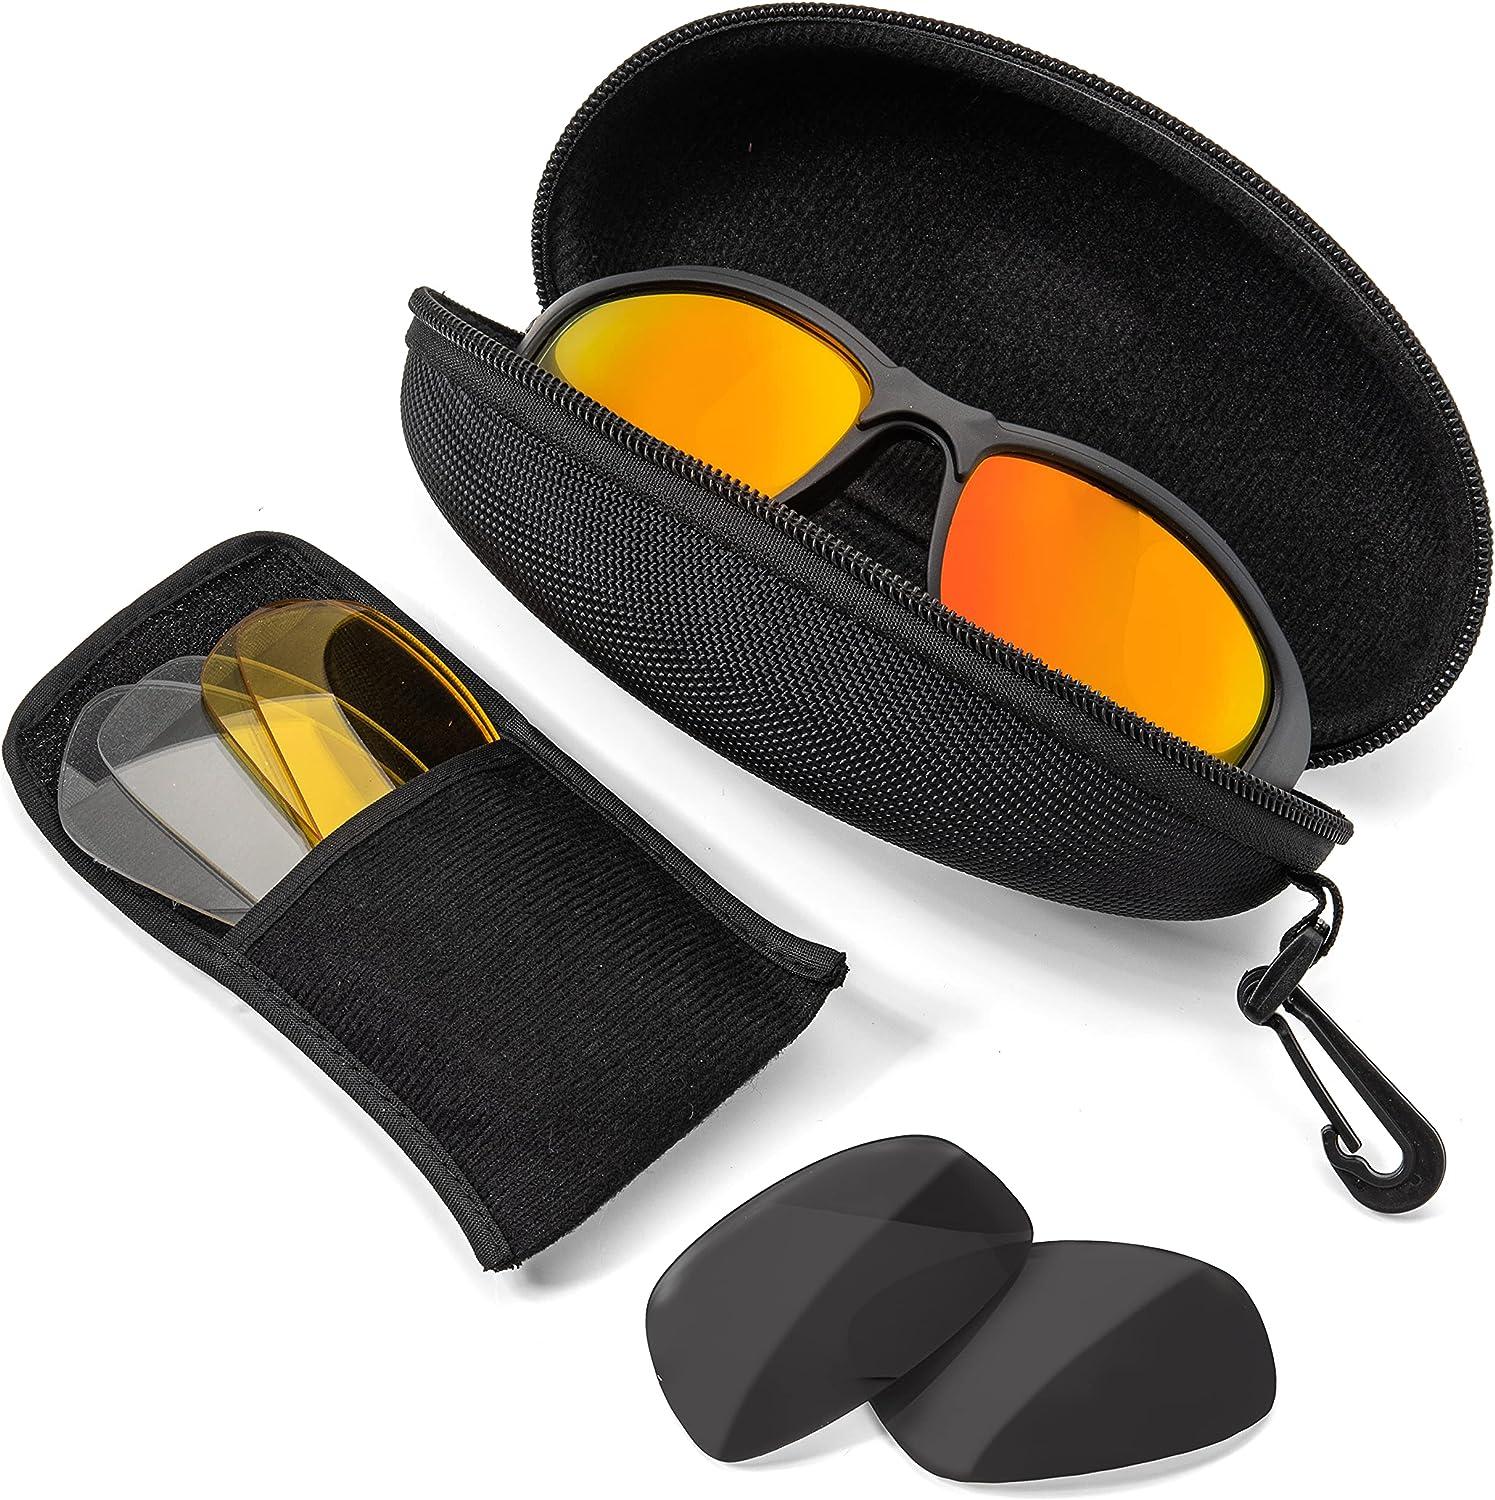 Safety Glasses Kit with Interchangeable Lenses-Anti Fog-Anti